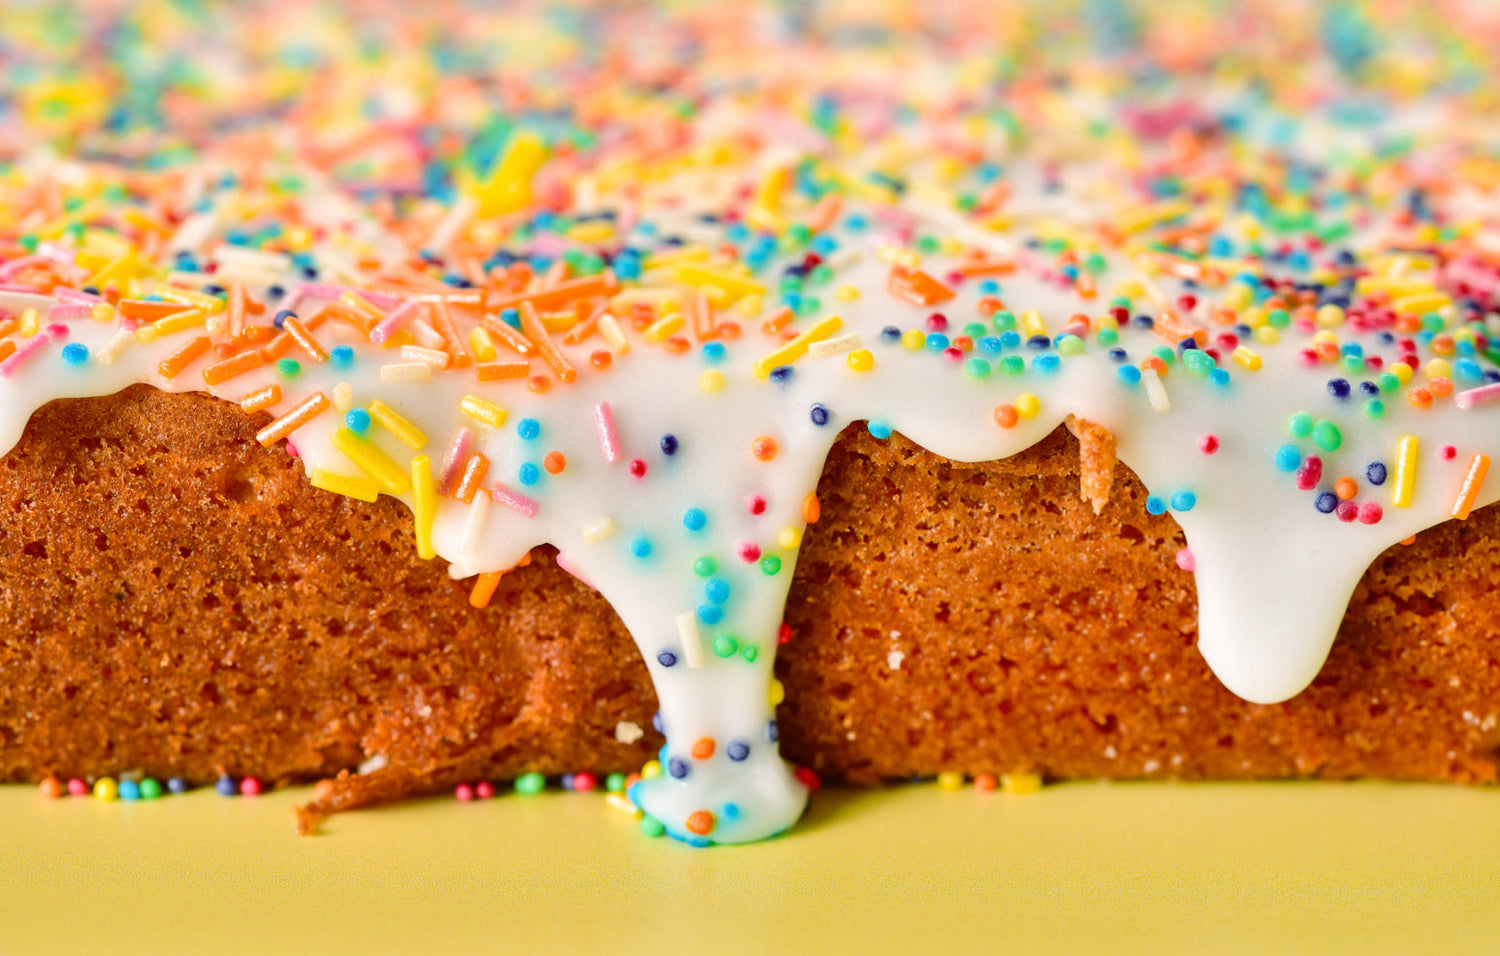 Close up photo of Old Skool Sponge, with icing dripping, covered in multi coloured hundreds and thousands